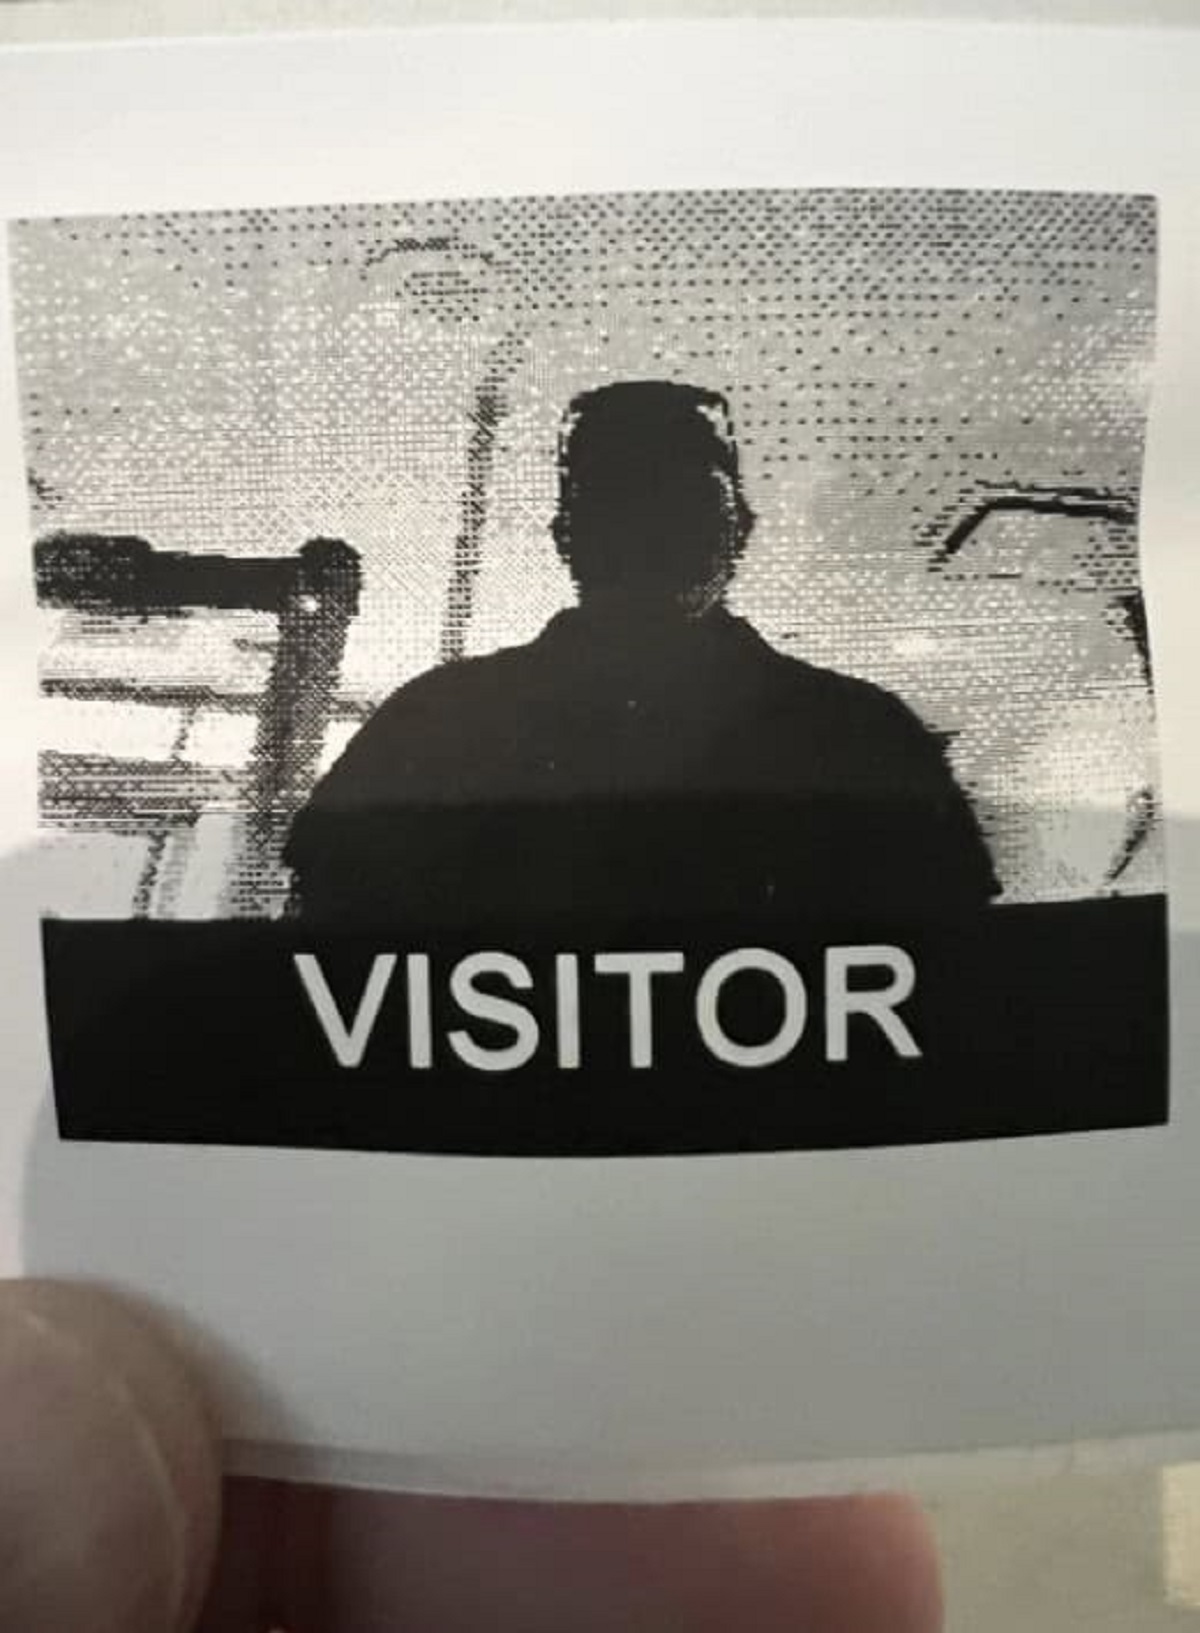 Spent 10 minutes getting checked in by security and this is my visitor’s badge.